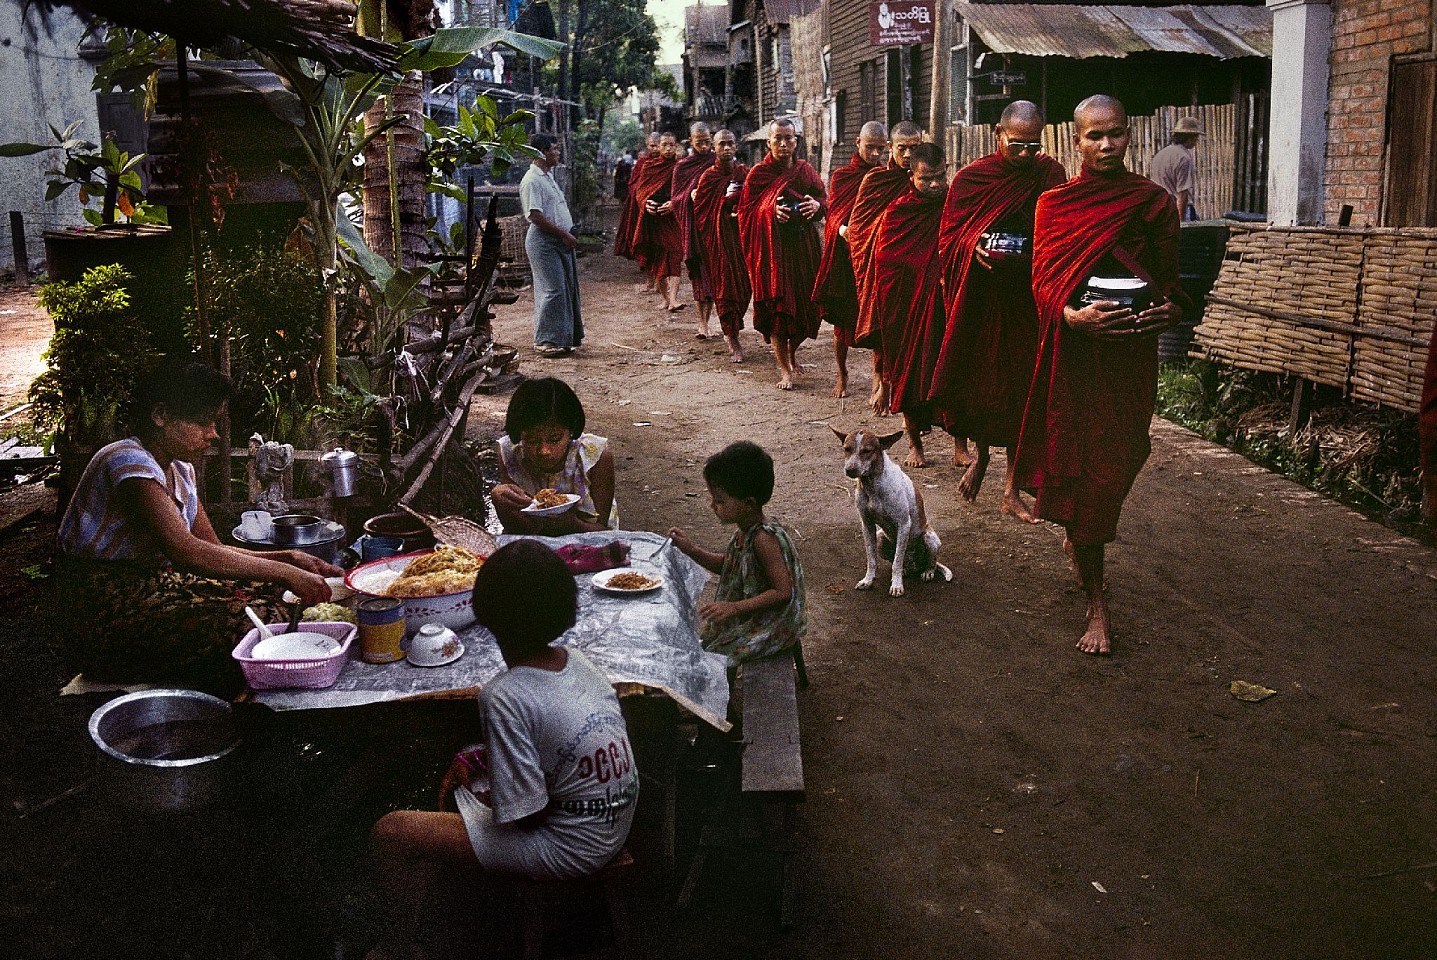 Steve McCurry, Procession of Monks, 1999
FujiFlex Crystal Archive Print
Price/Size on request